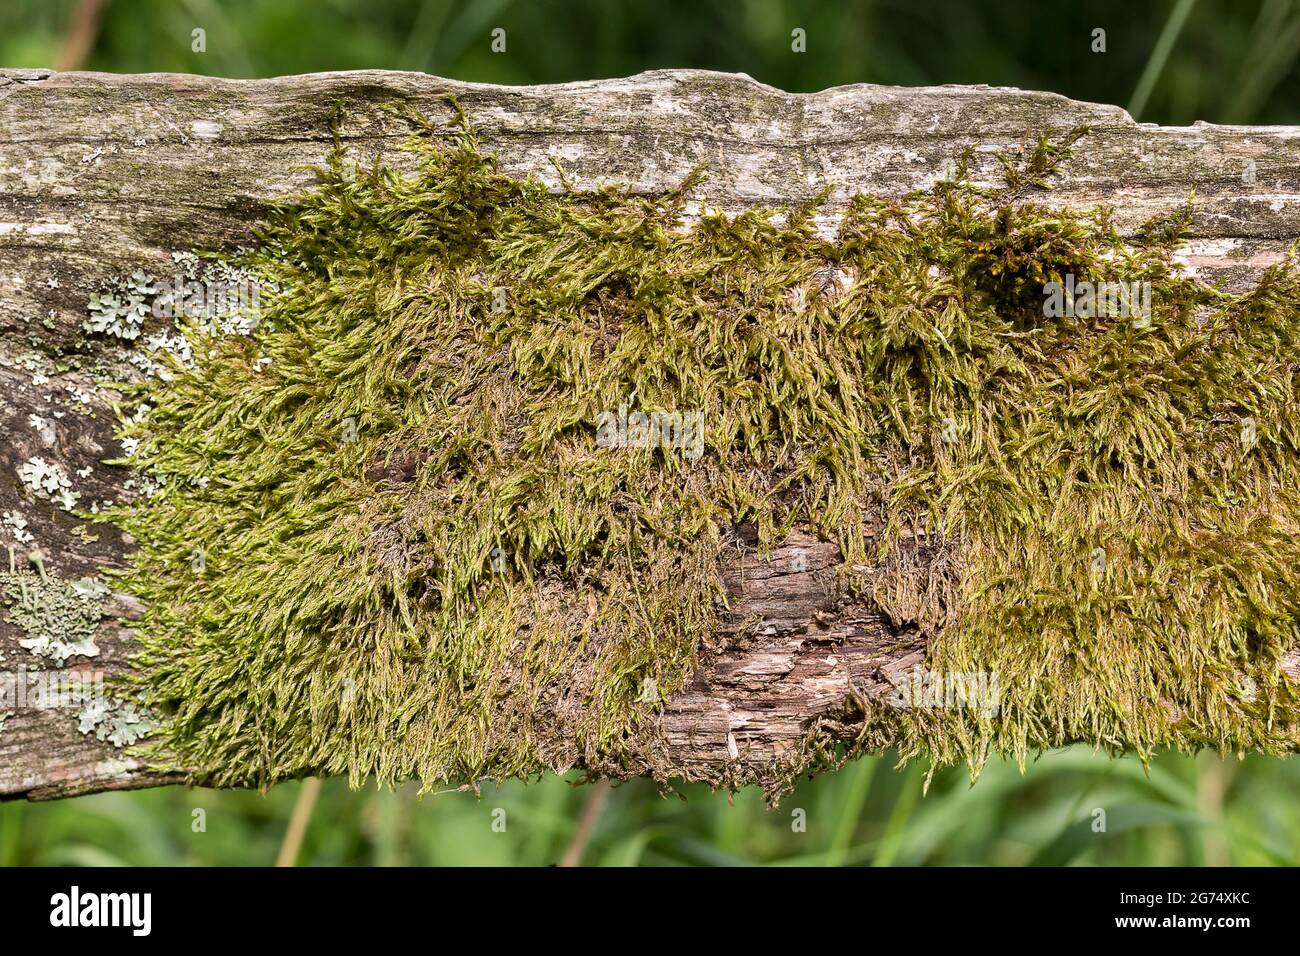 Hypnum cupressiforme moss growing on an old timber fencing rail horizontal composition green pointed oval matted overlapping flattened leaves Stock Photo